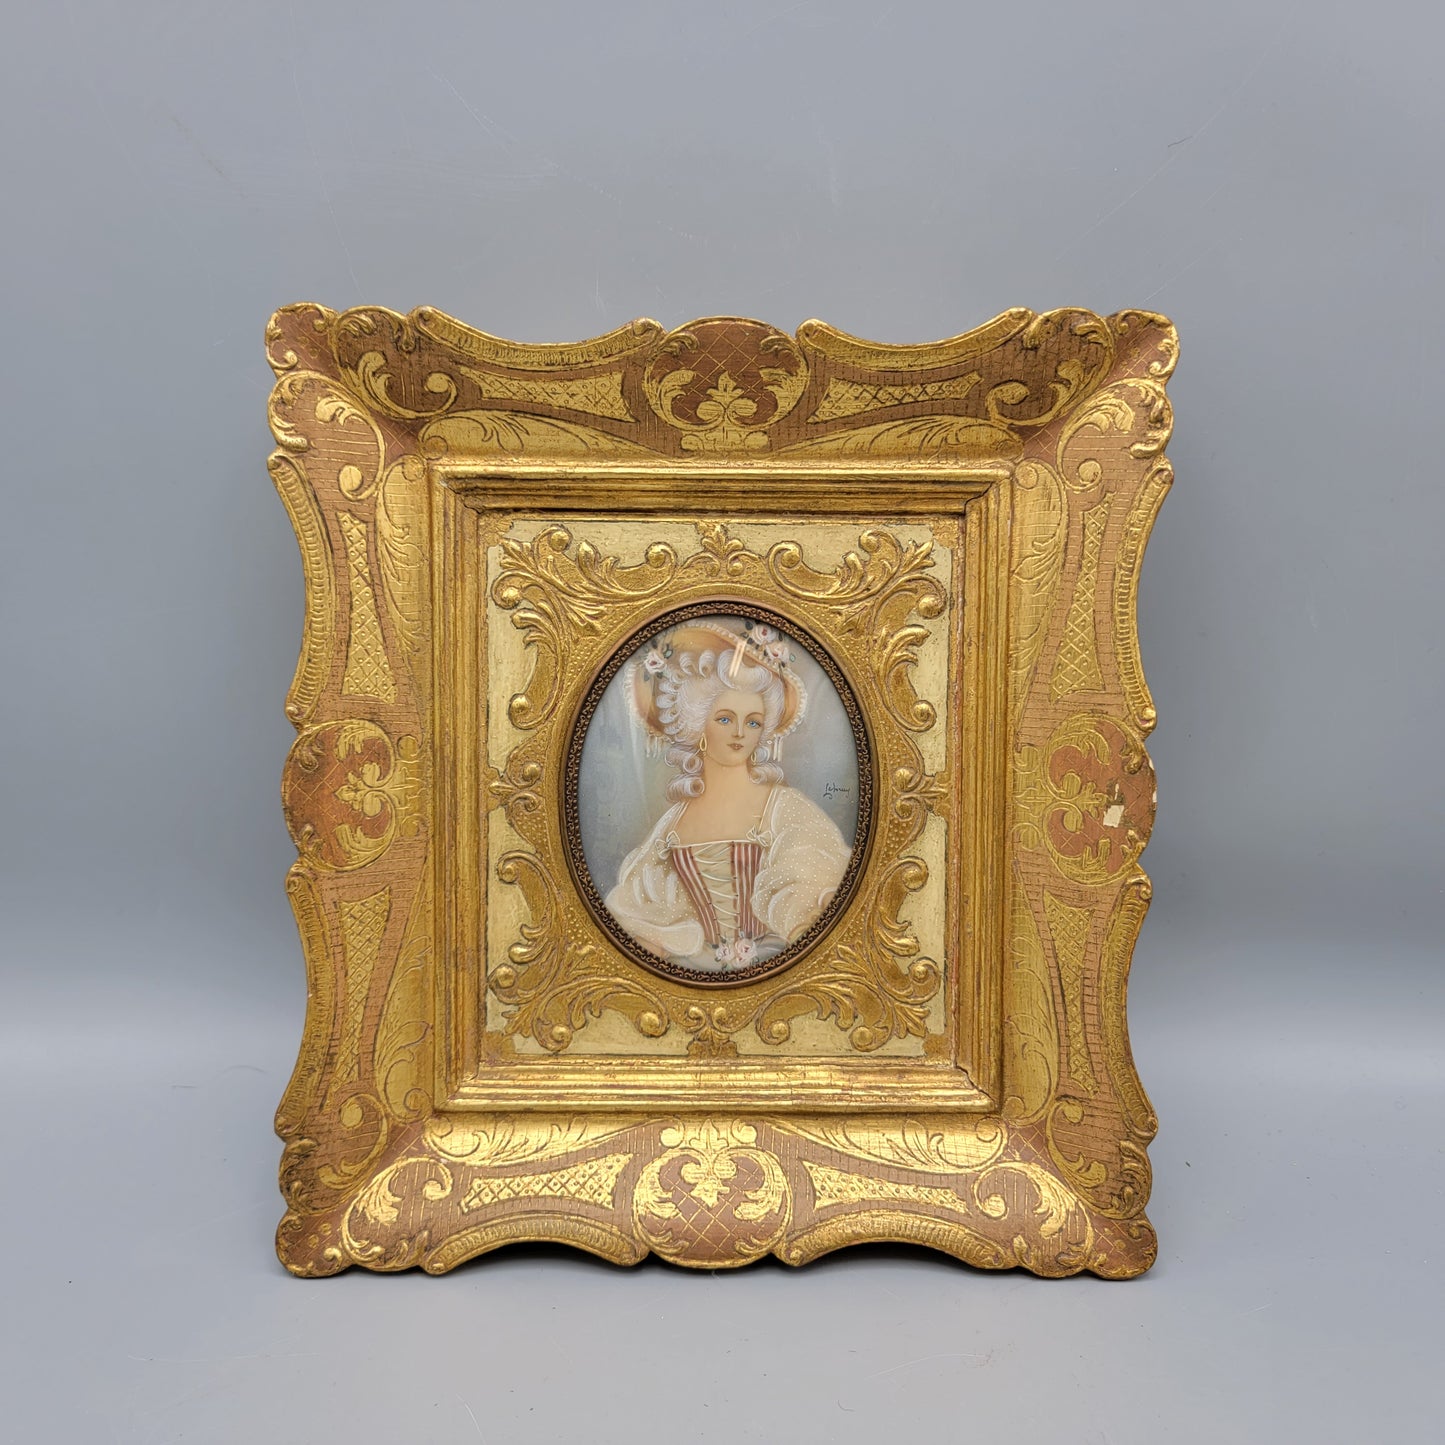 Italian Miniature Painting on Celluloid in Papier Mache Frame - Signed LeBerry